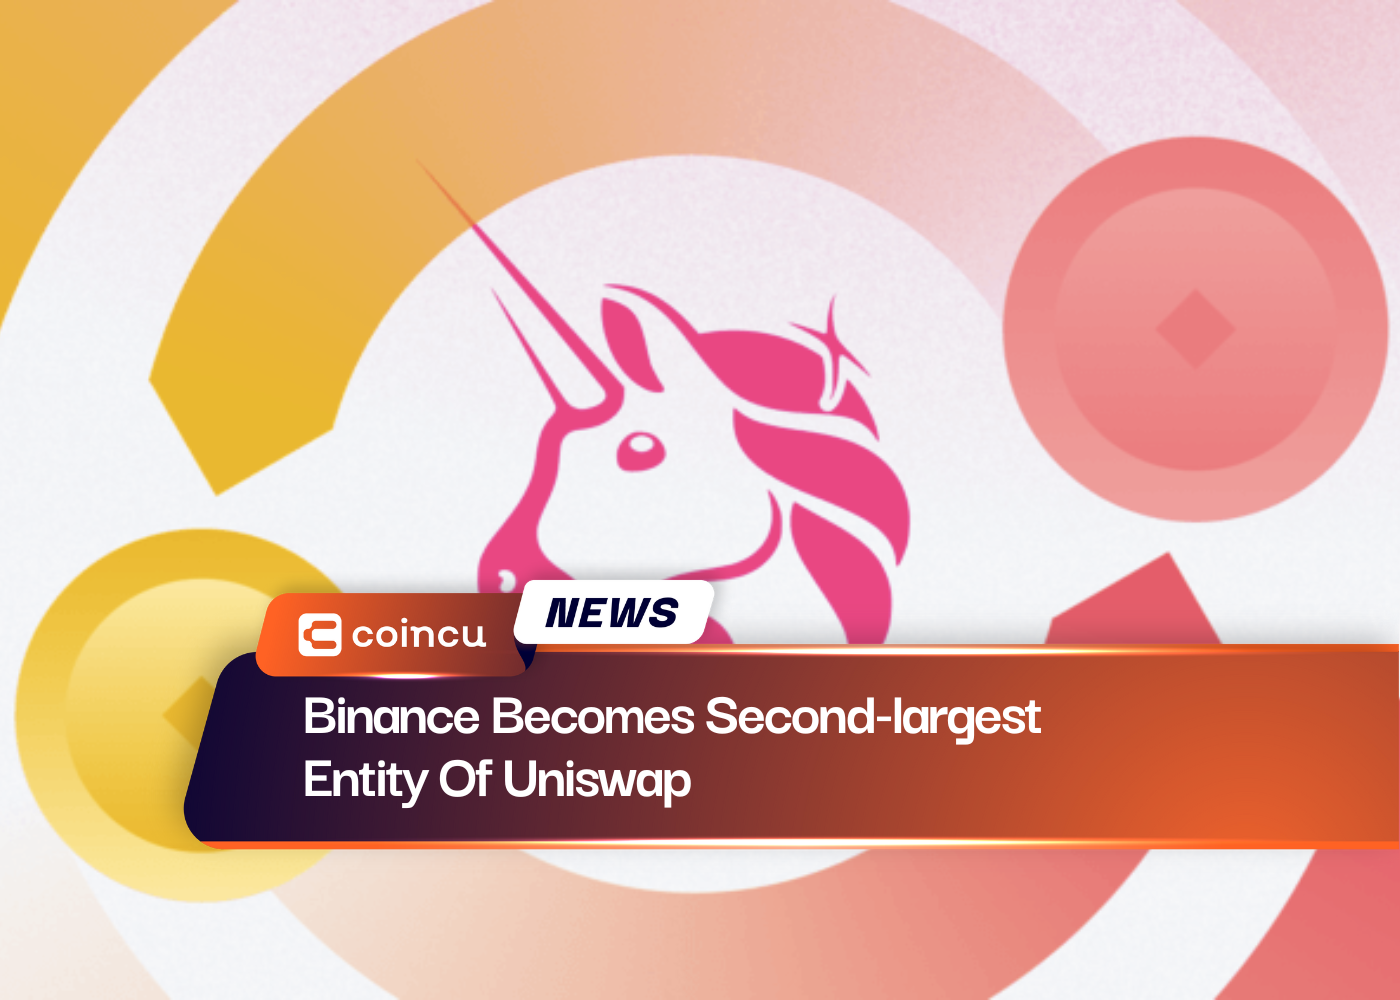 Binance Becomes Second-largest Entity Of Uniswap